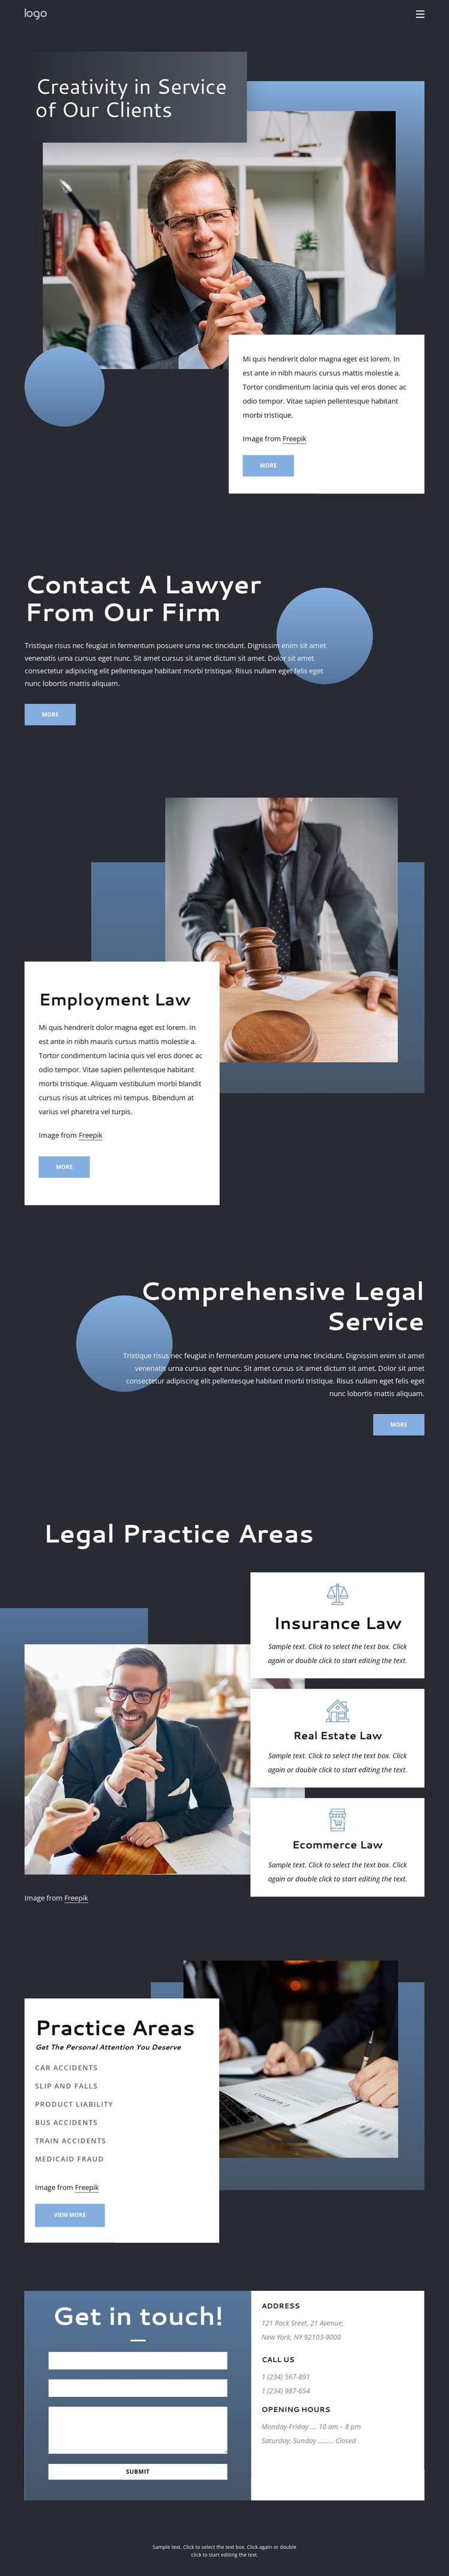 Experienced legal advice Website Builder Software